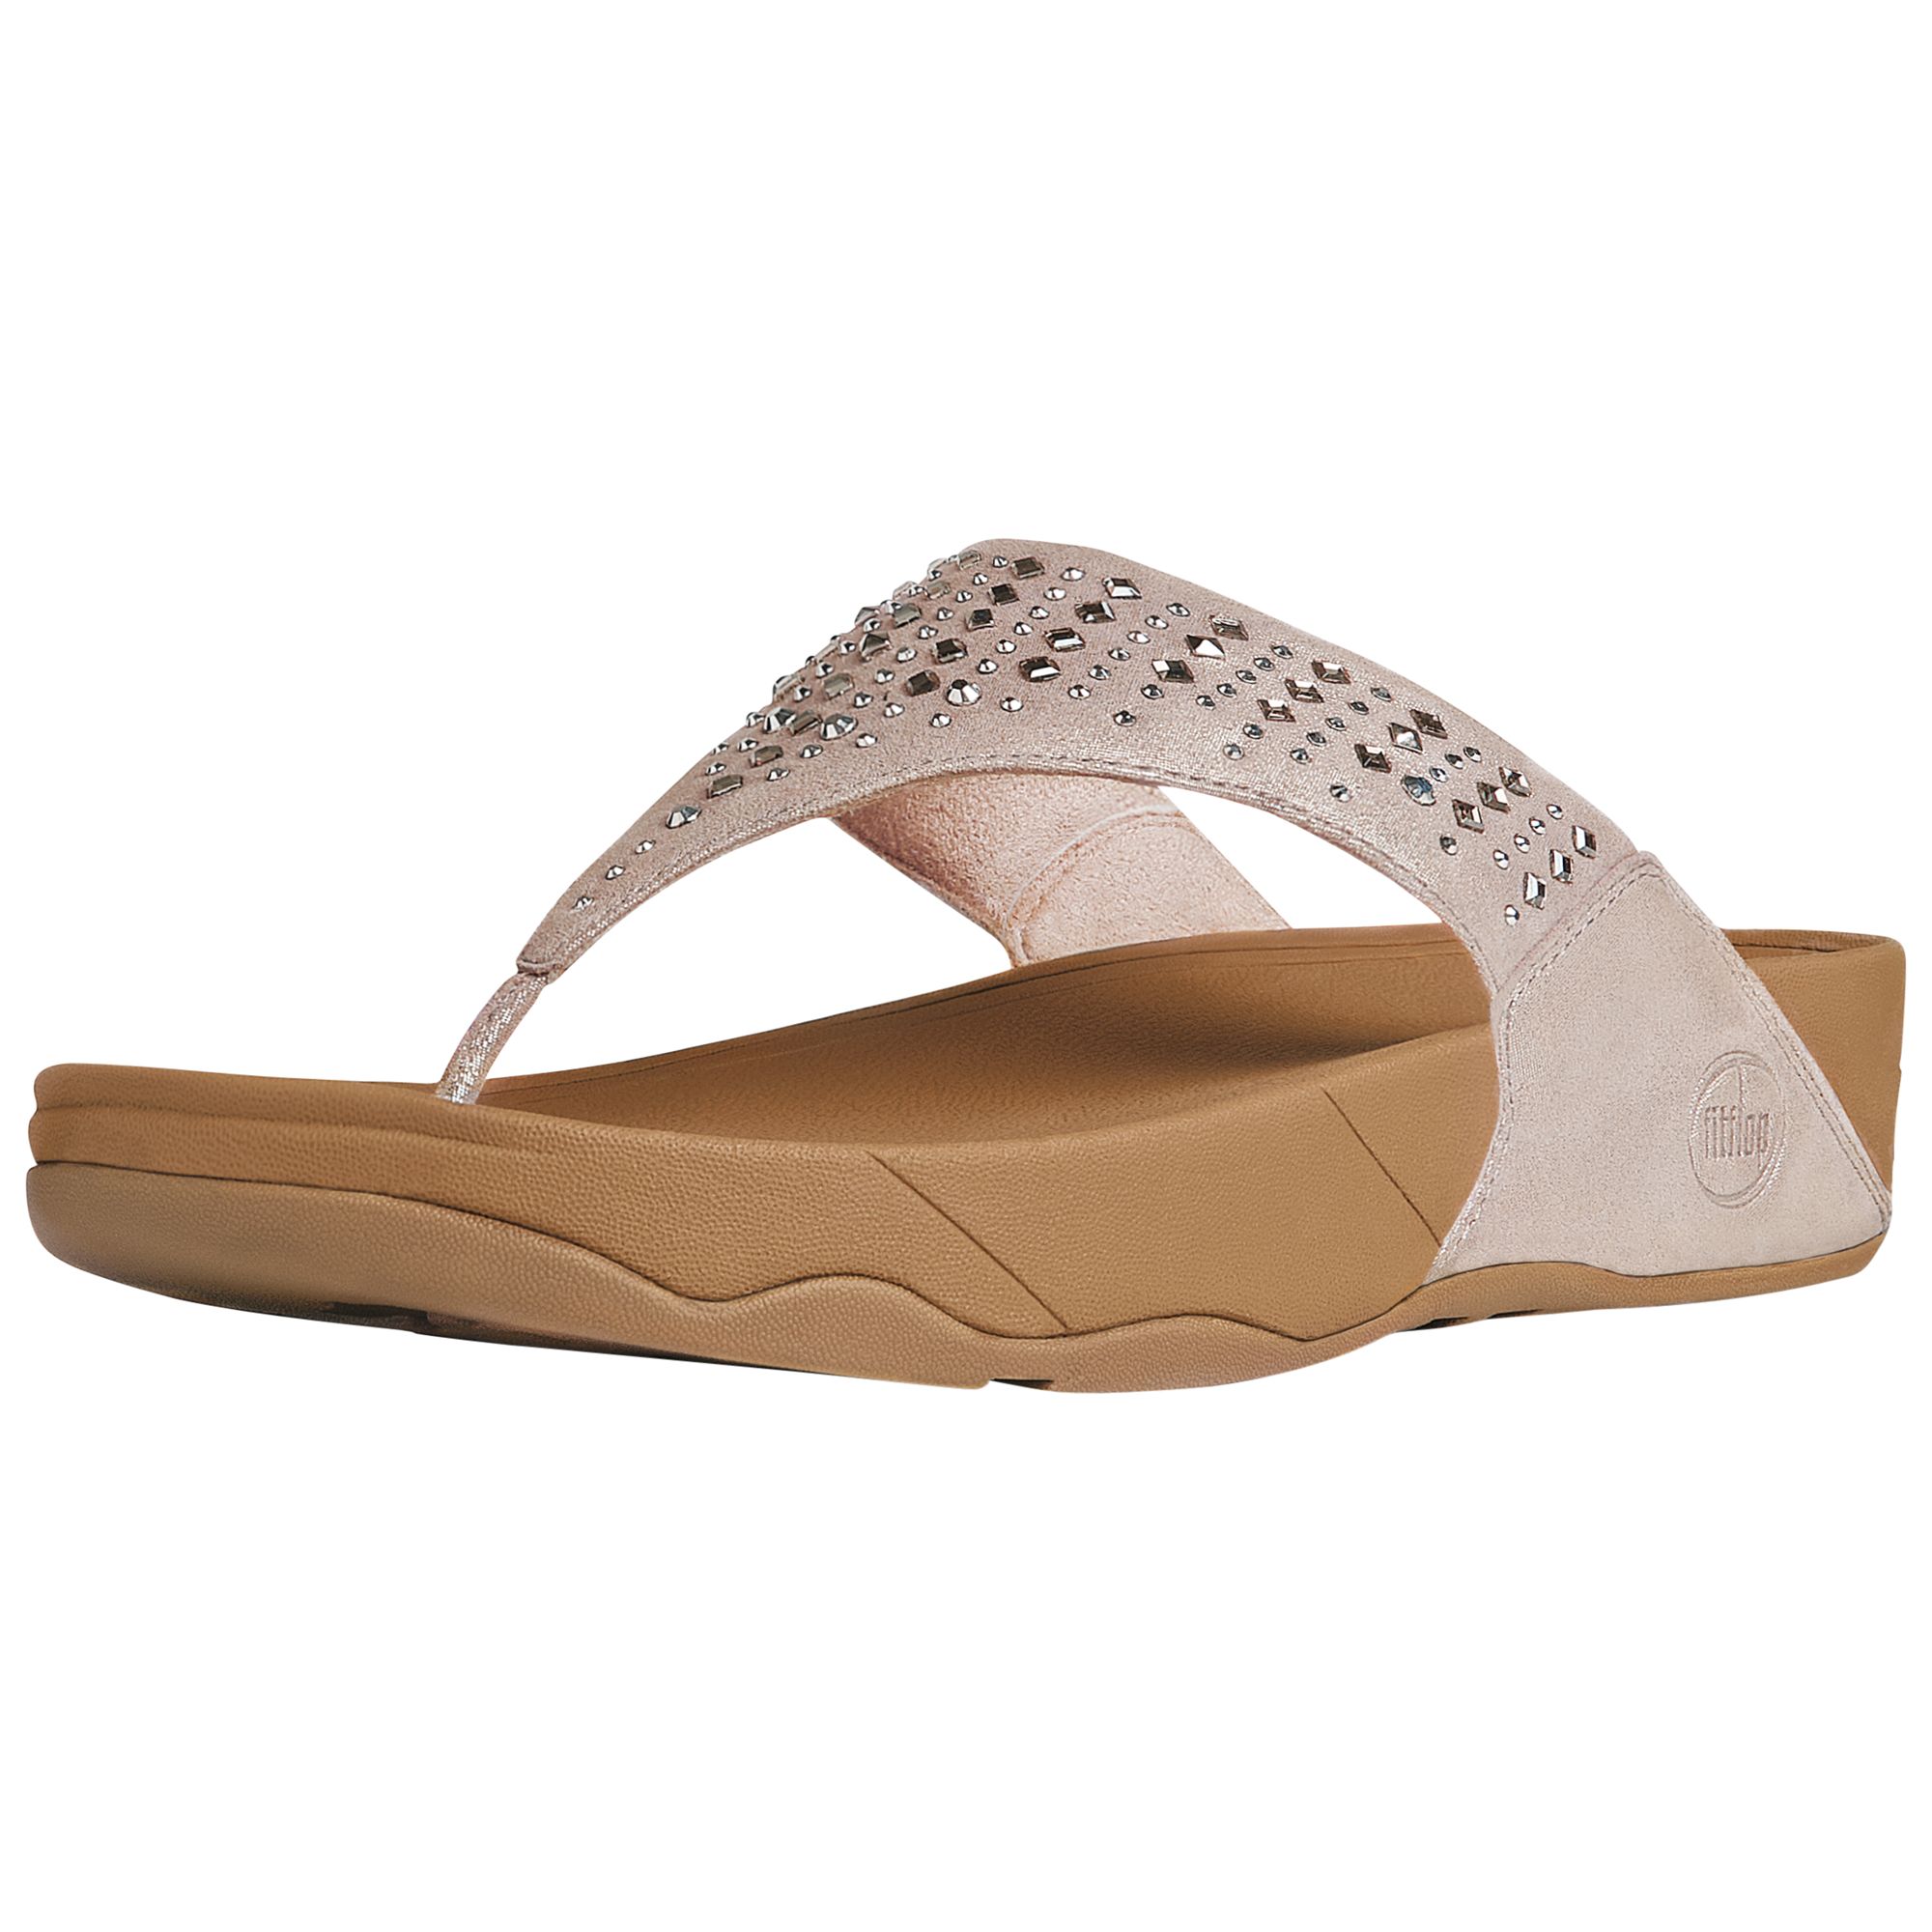 Buy FitFlop Novy Rhinestone Thong Sandals, Nude Online at johnlewis ...